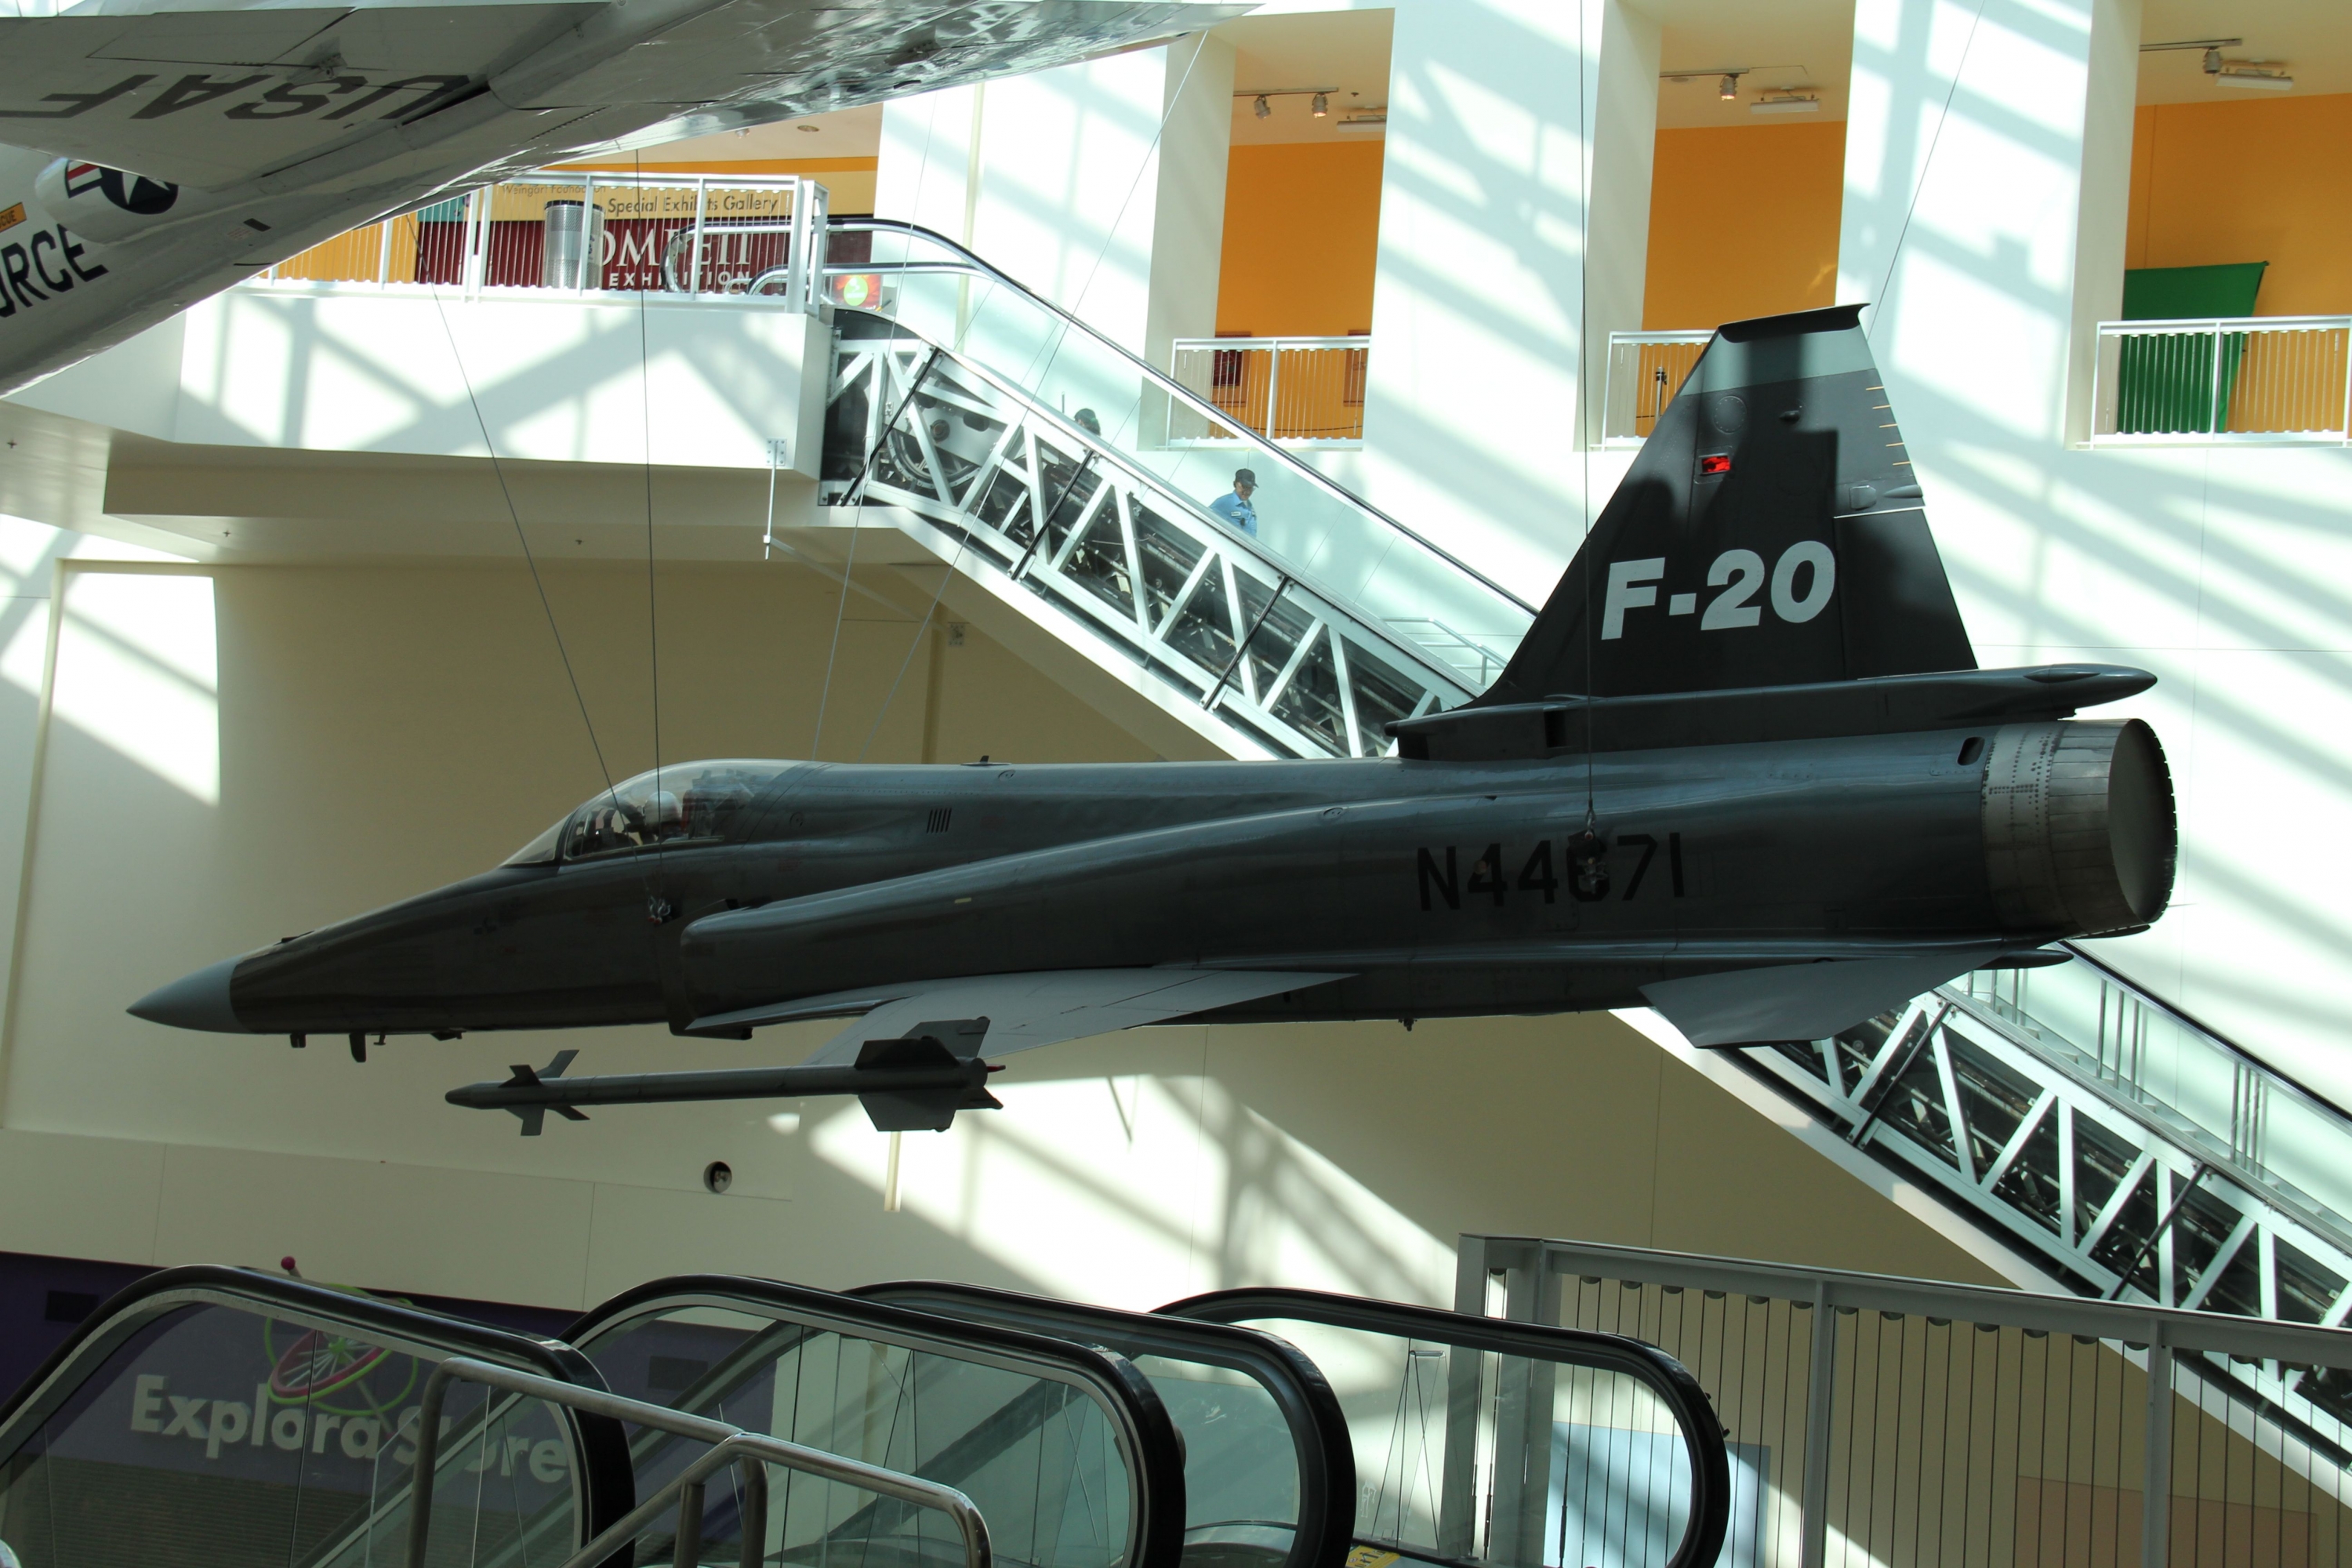 F-20 in front of California Science Center